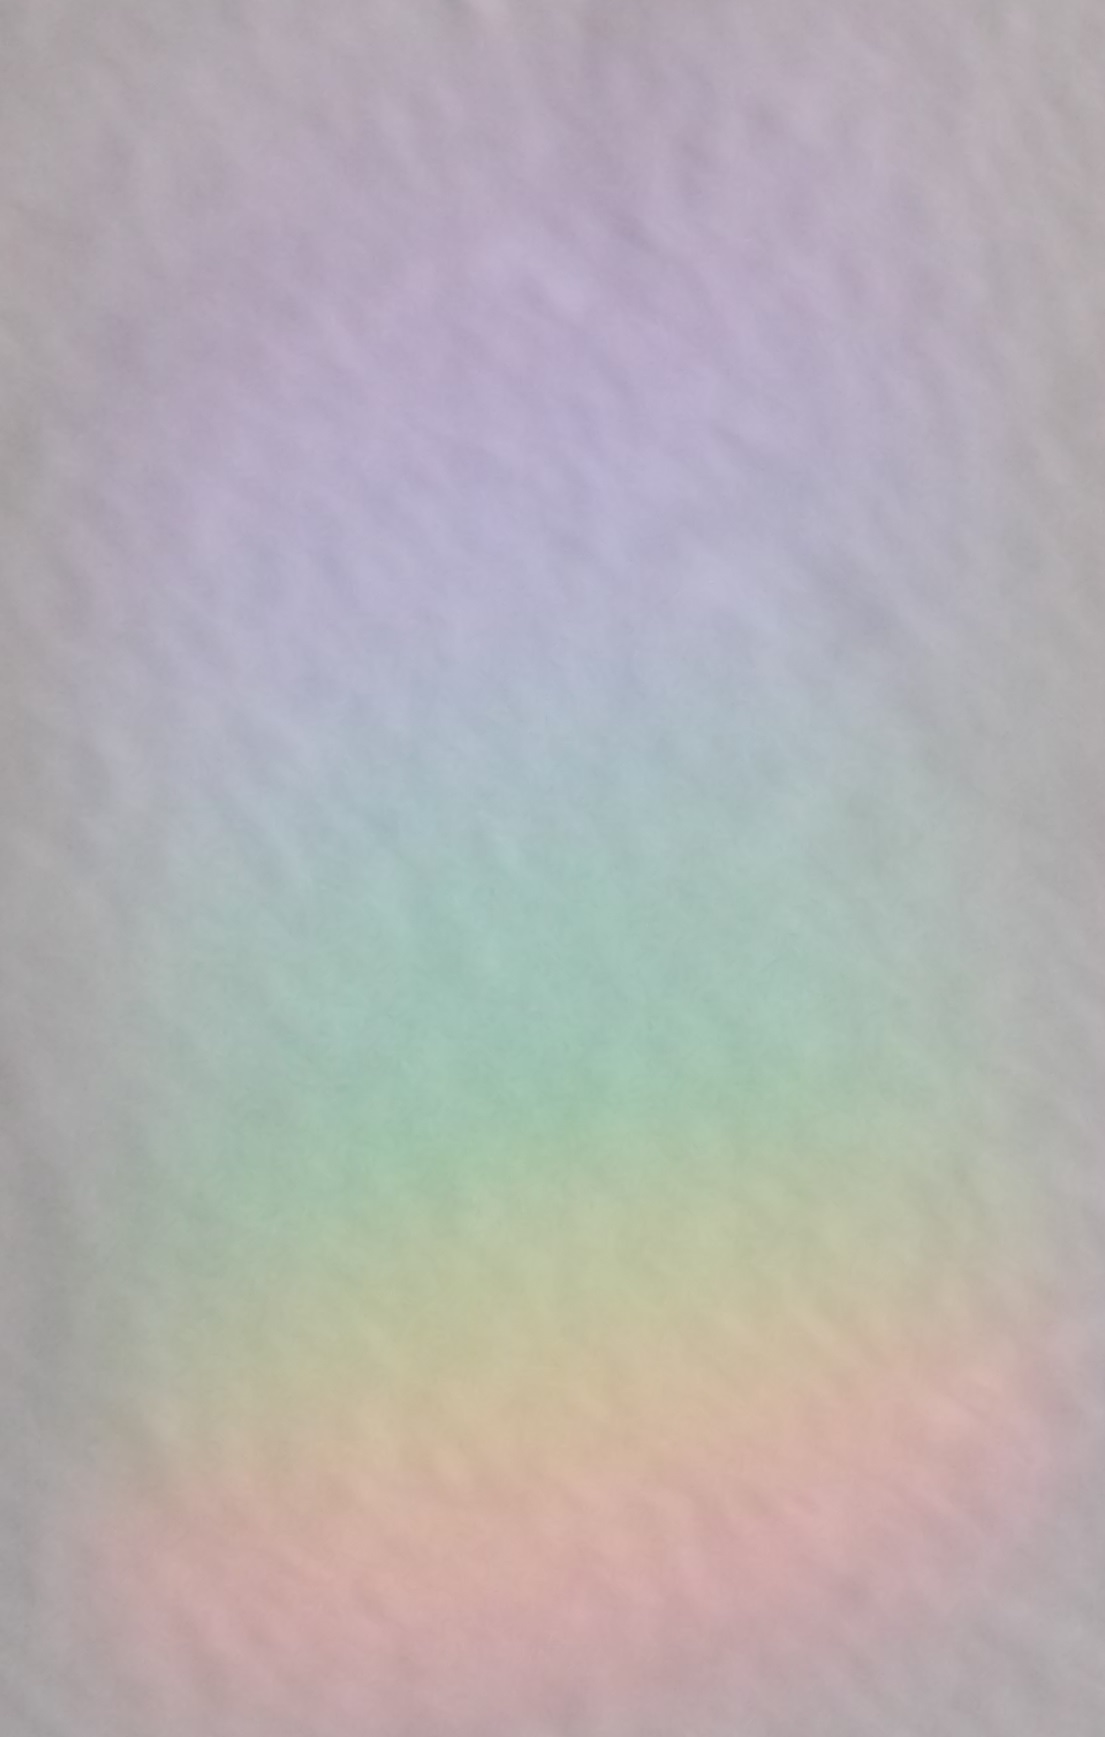 Photo I took of a prism reflection on my wall.